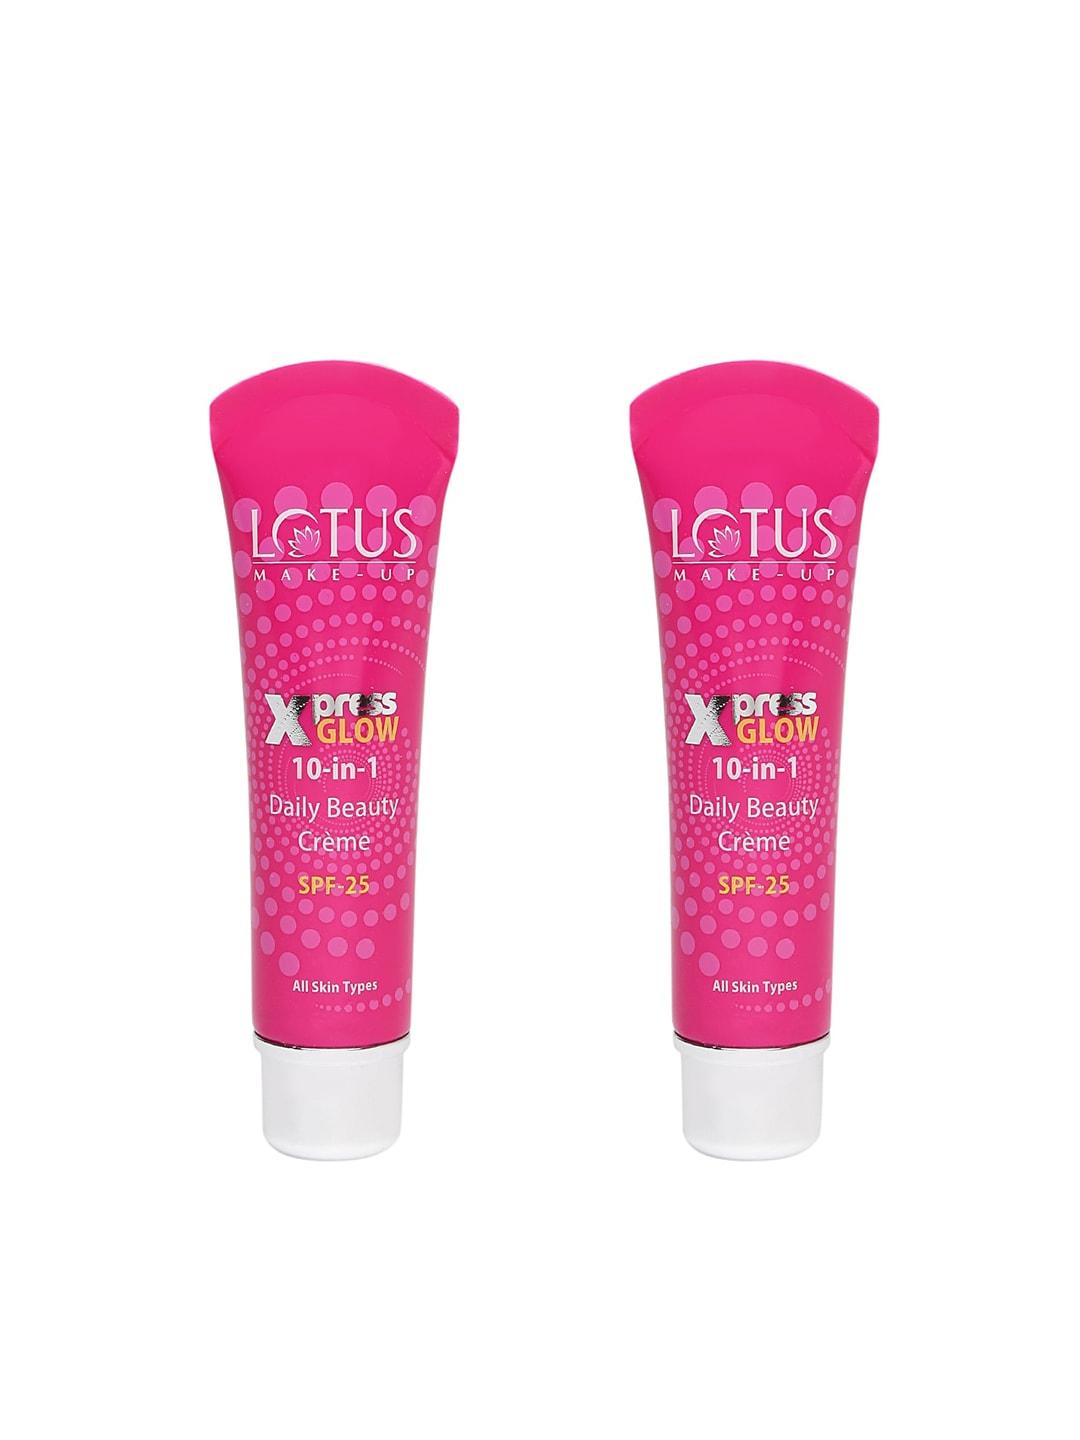 Lotus Herbals Set of 2 Xpress Glow 10-in-1 Daily Beauty Creme 30g each - Royal Pearl